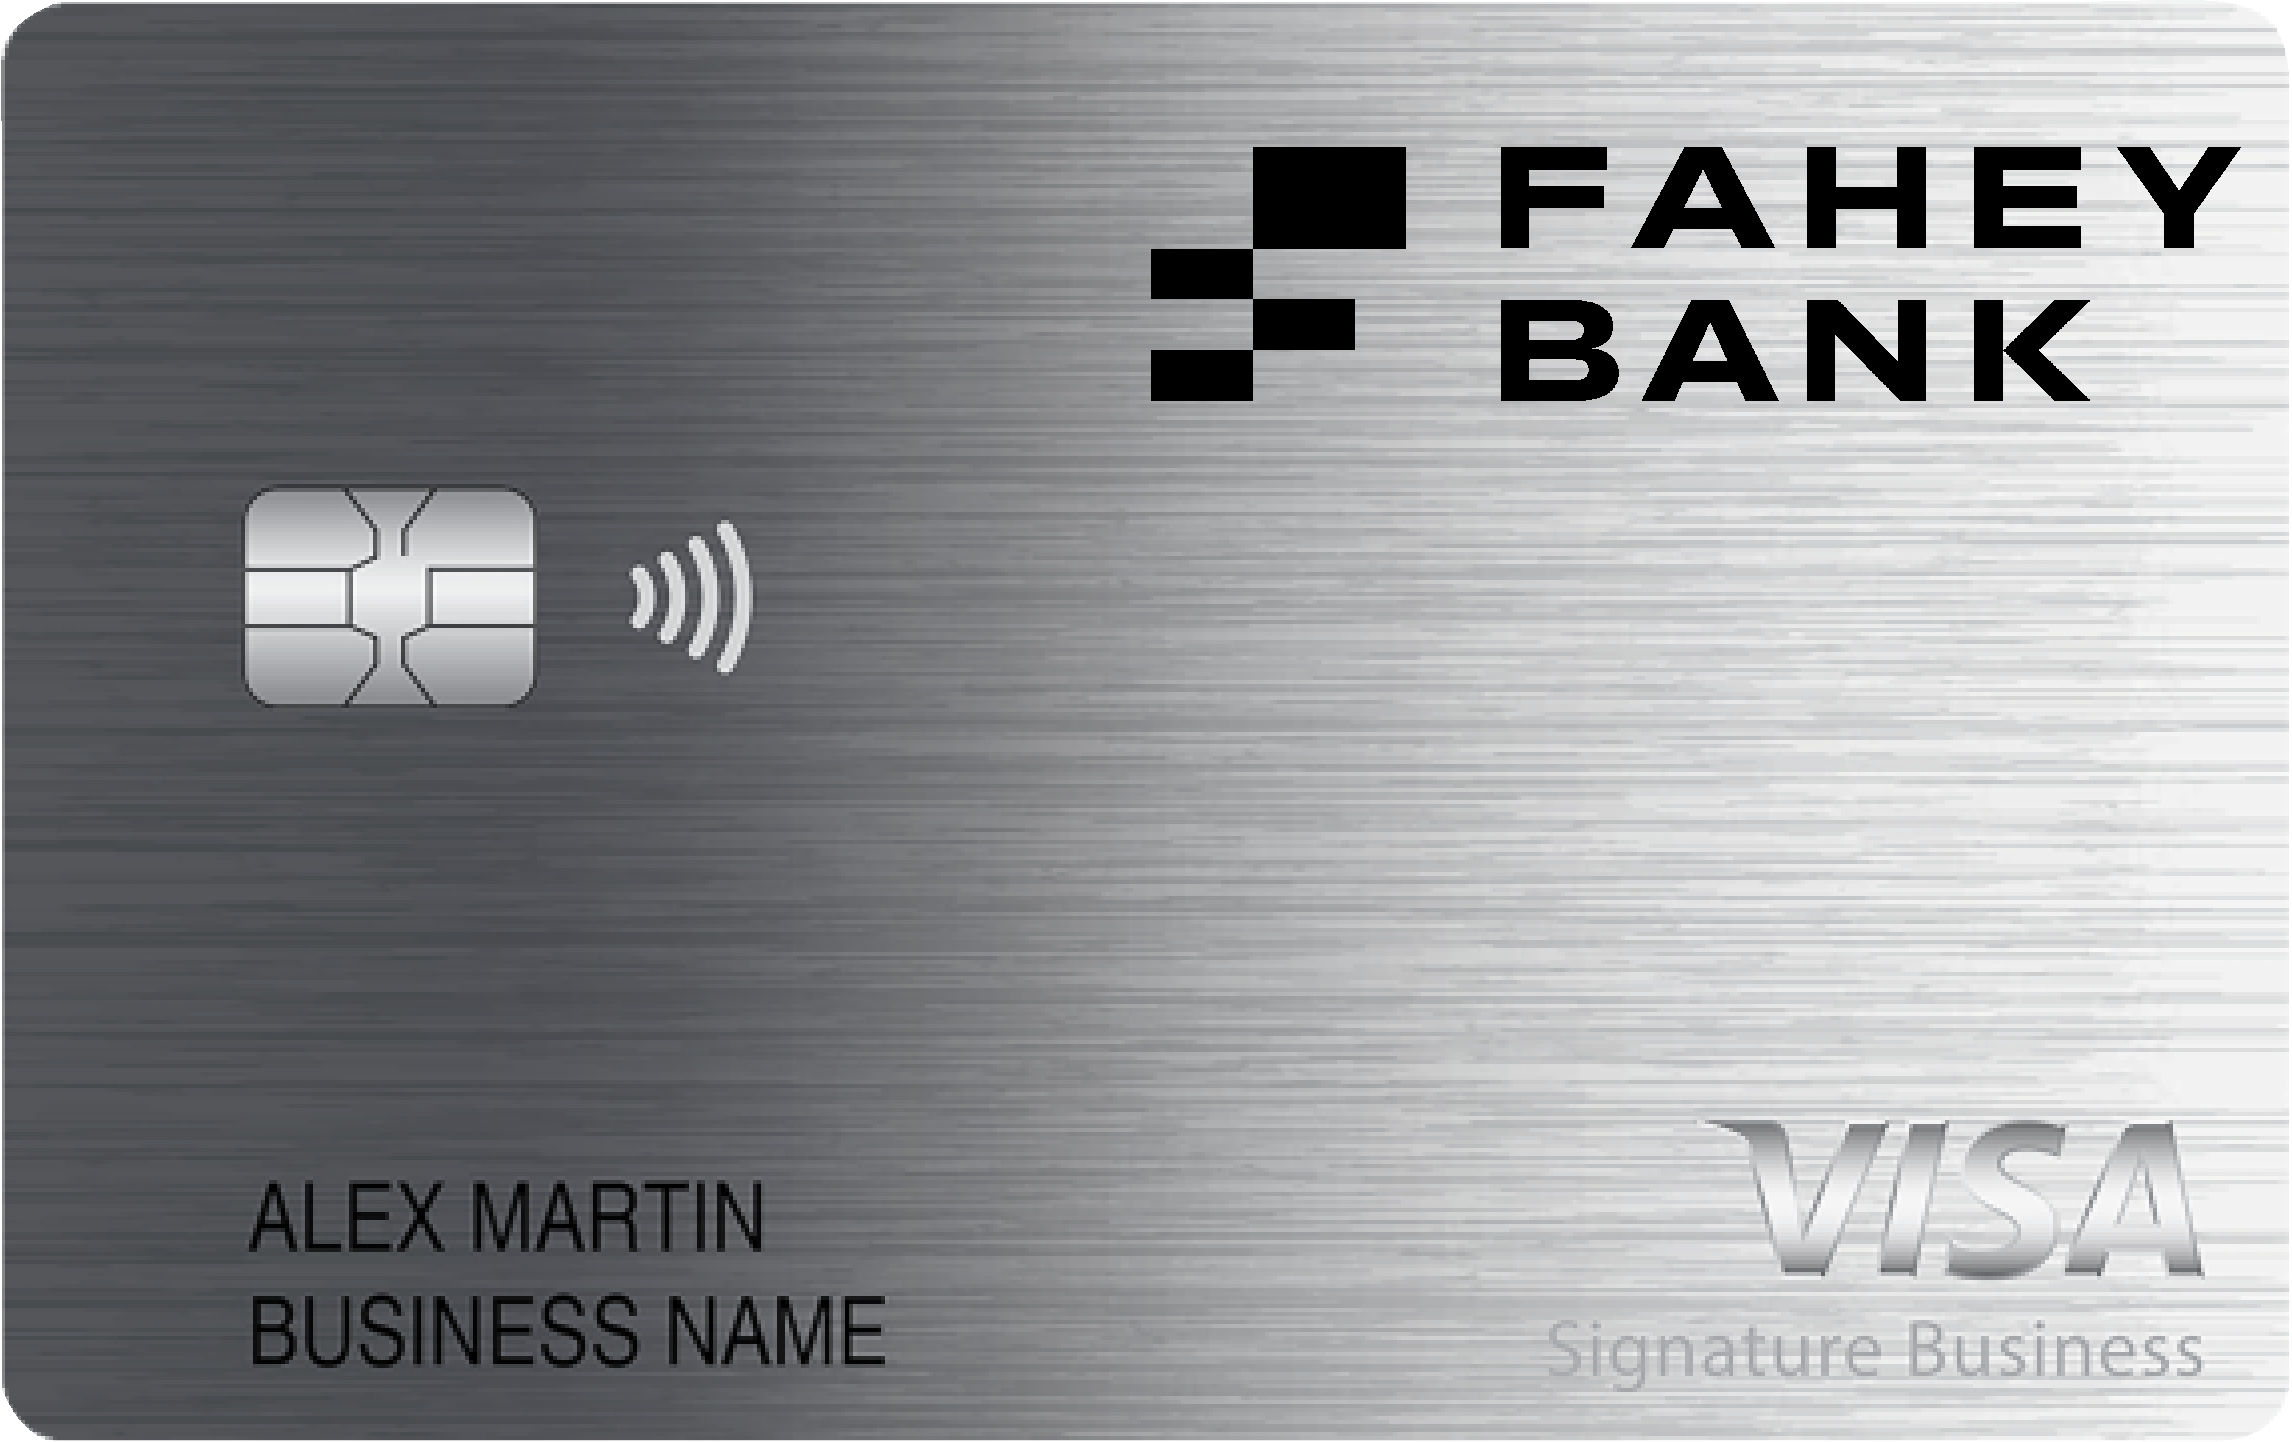 The Fahey Banking Company Smart Business Rewards Card